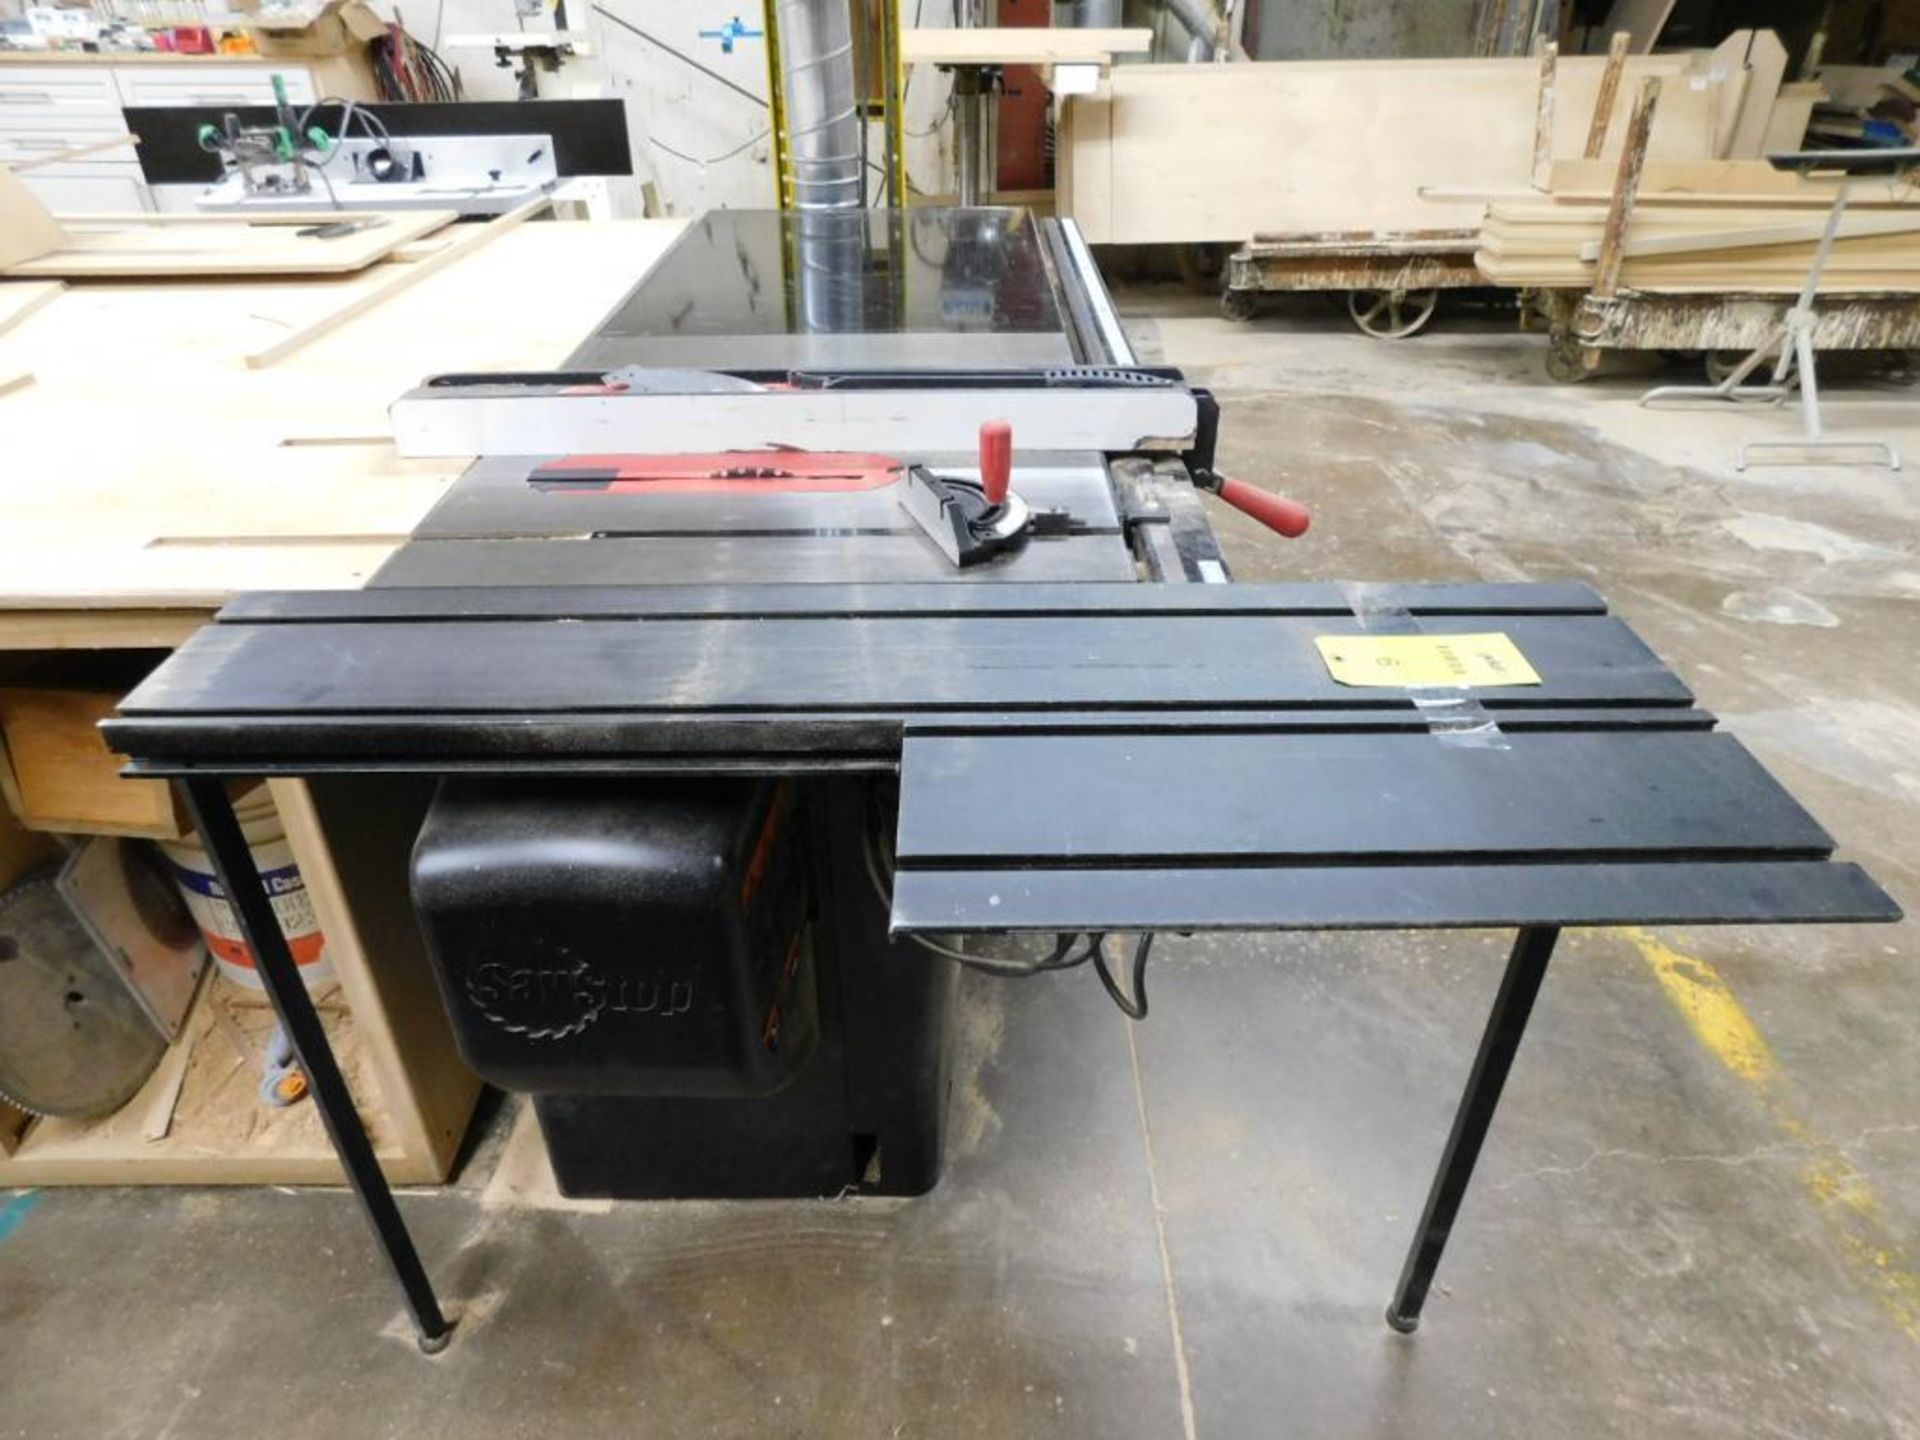 Sawstop Table Saw, Model PCS- 31230, S/N P143532354 (2014), 3 HP, Tilting Arbor, Fence - Image 3 of 6